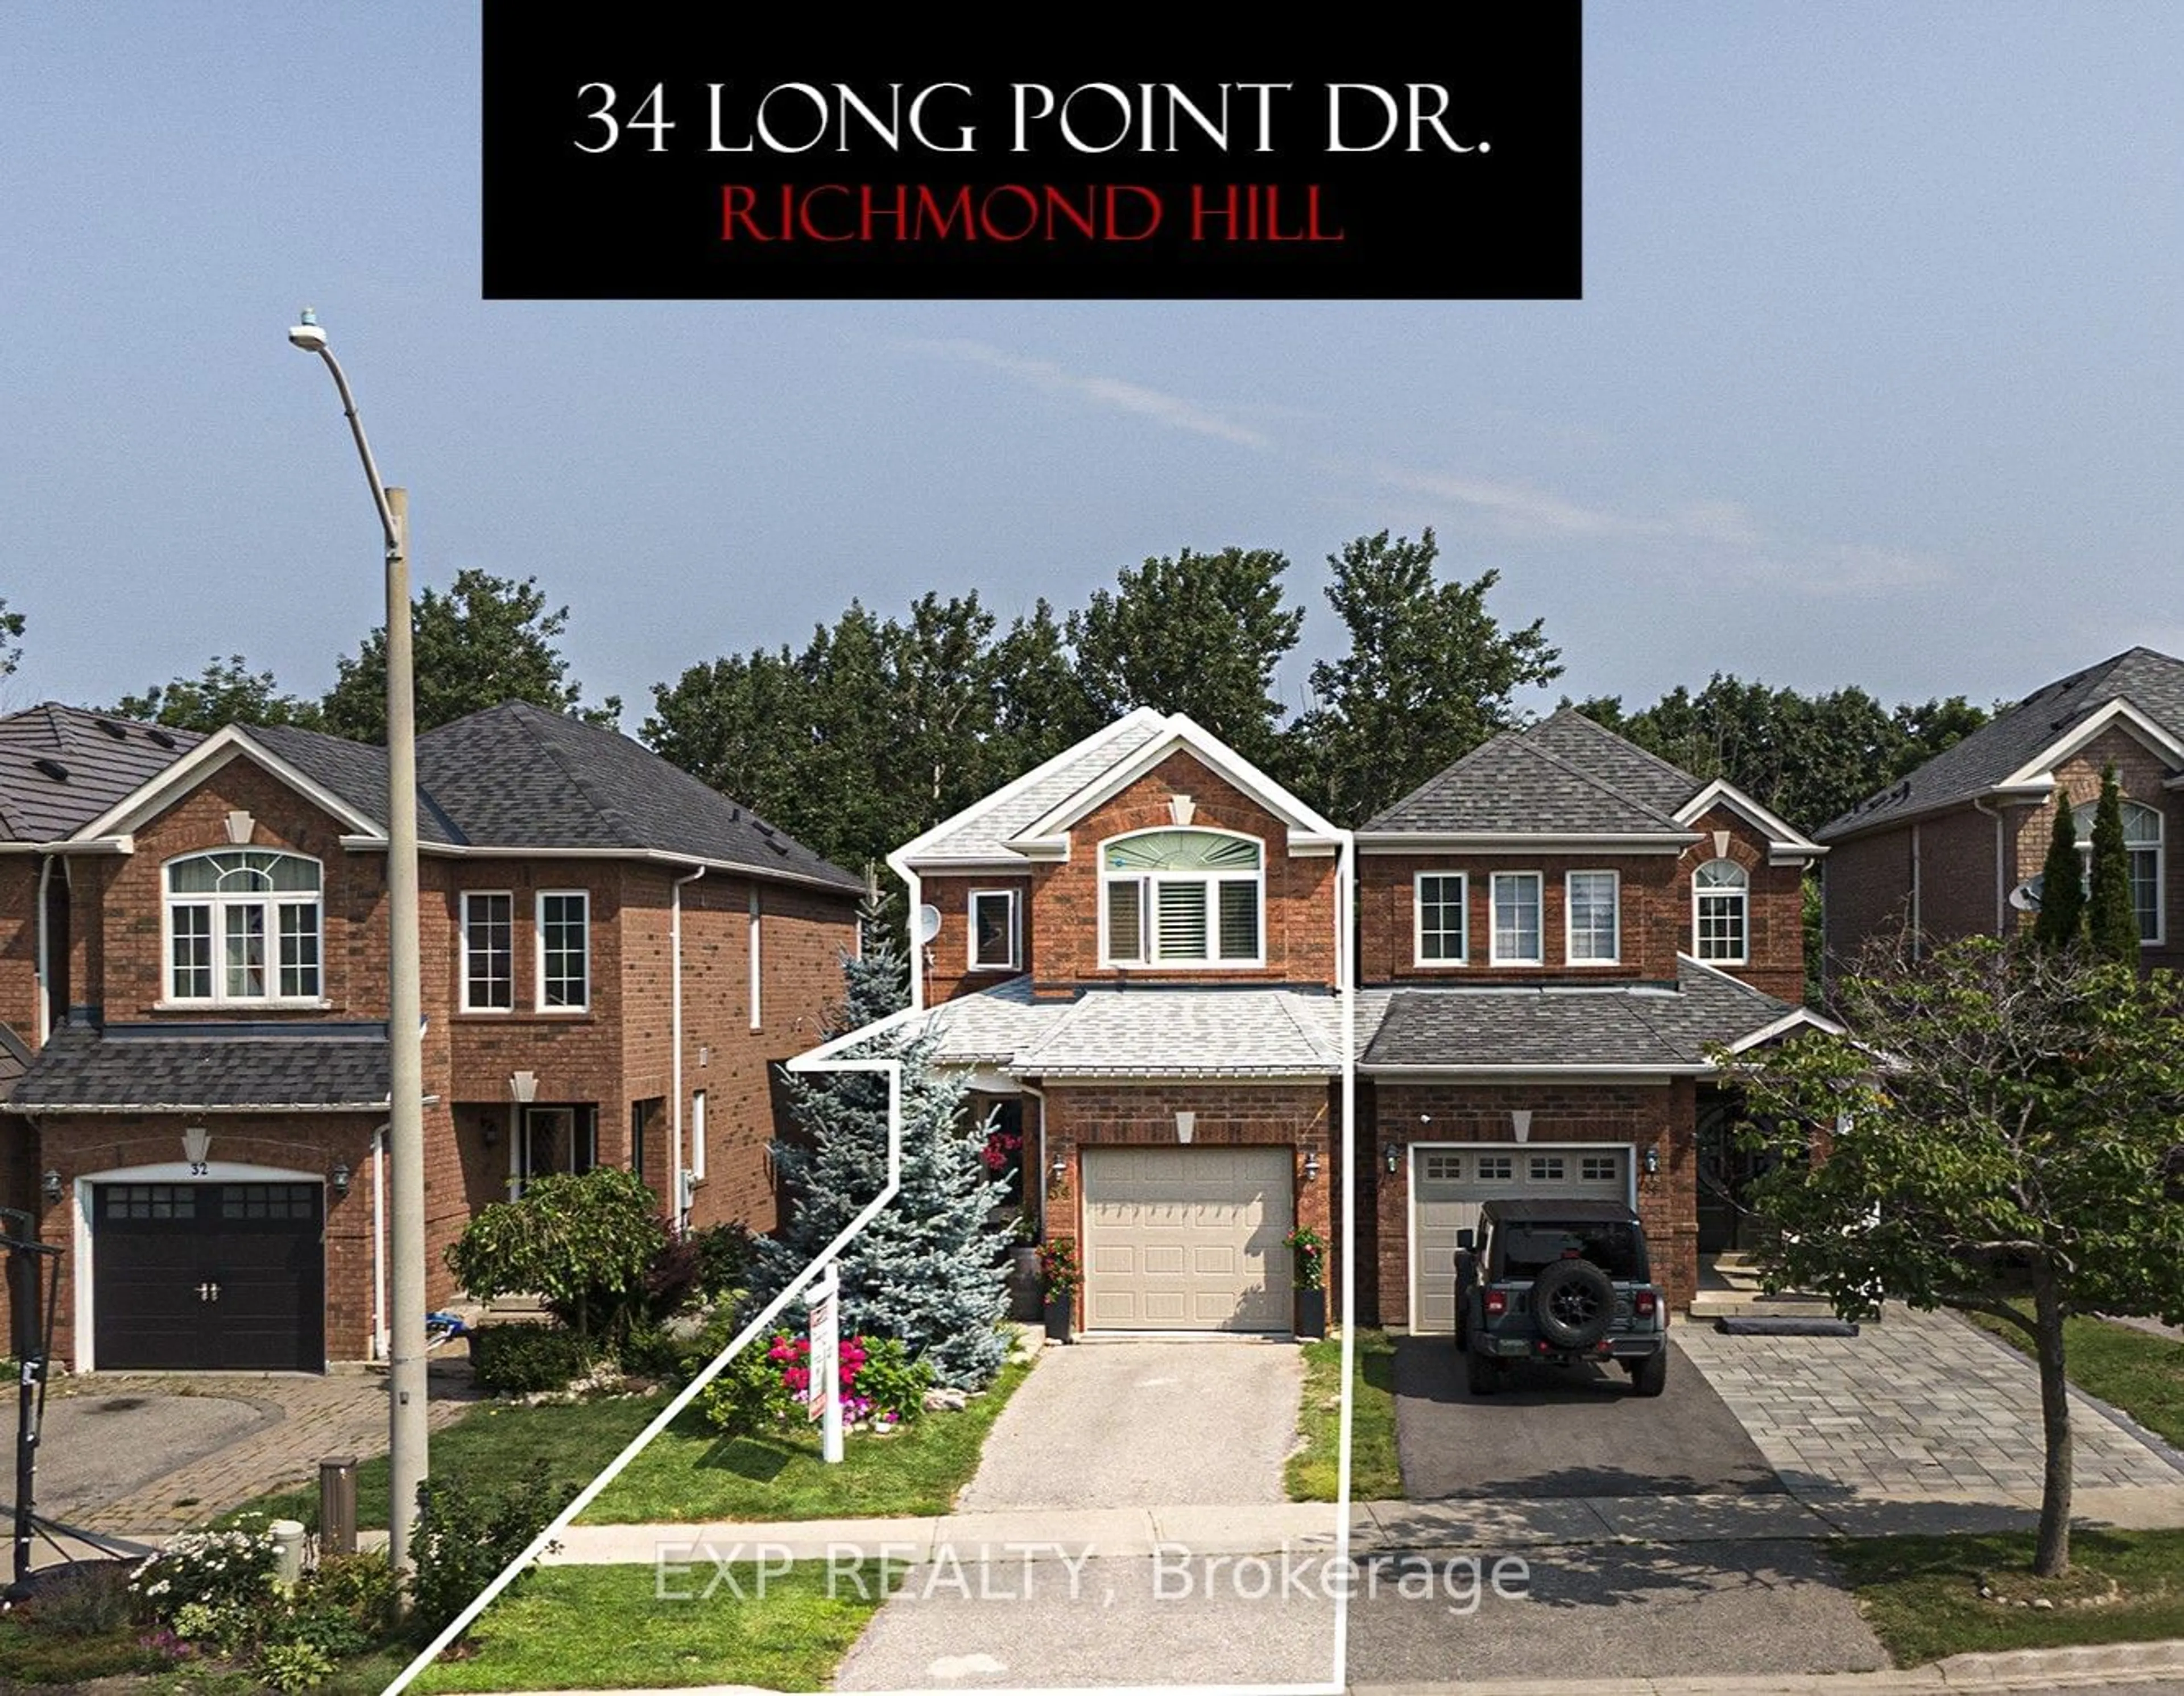 Home with brick exterior material for 34 Long Point Dr, Richmond Hill Ontario L4E 3W8